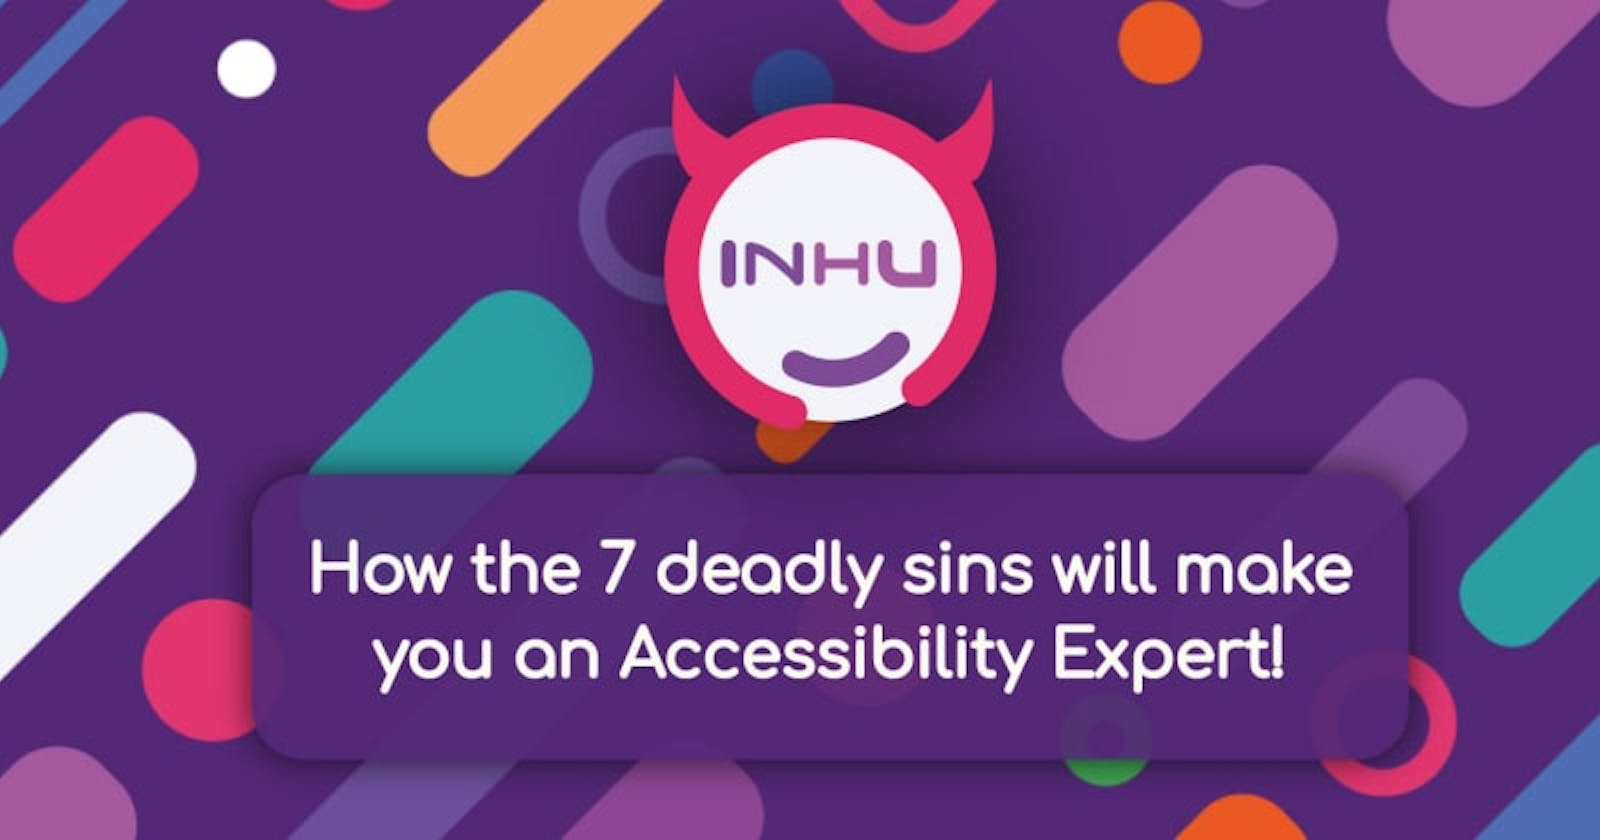 How the 7 deadly sins 👿 will make you an Accessibility Expert! 😇